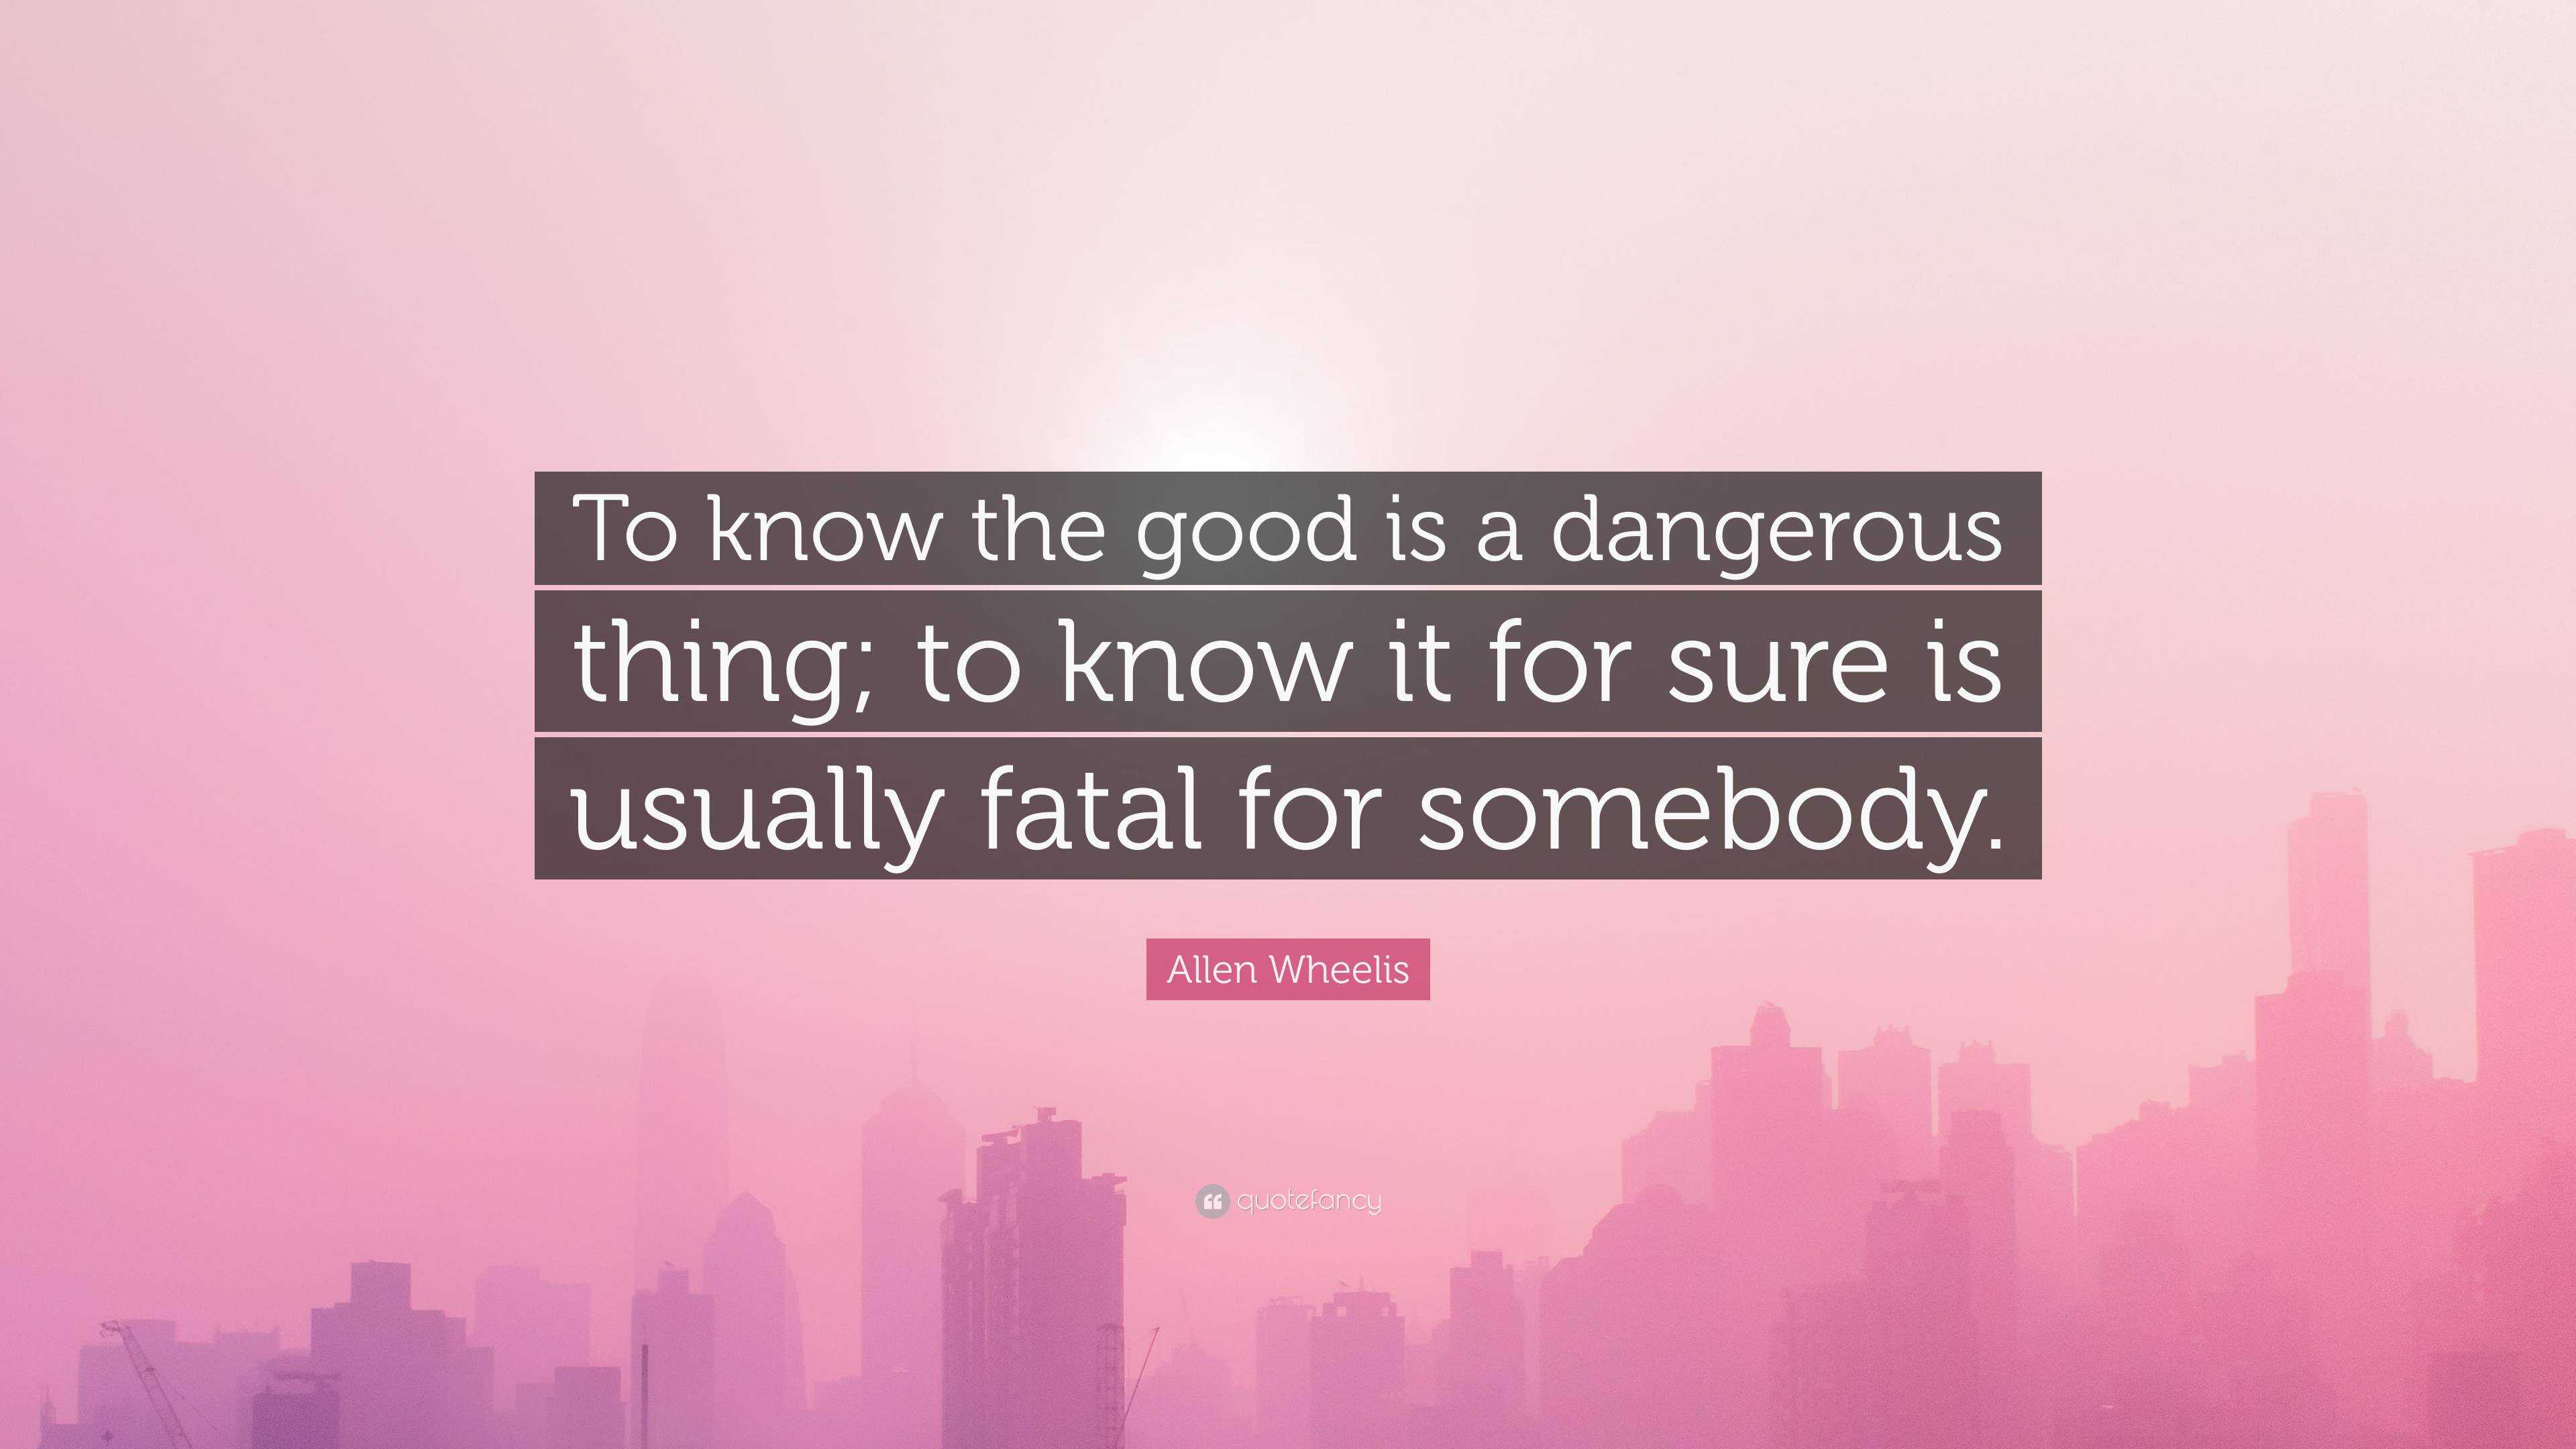 Allen Wheelis Quote: “To know the good is a dangerous thing; to know it ...